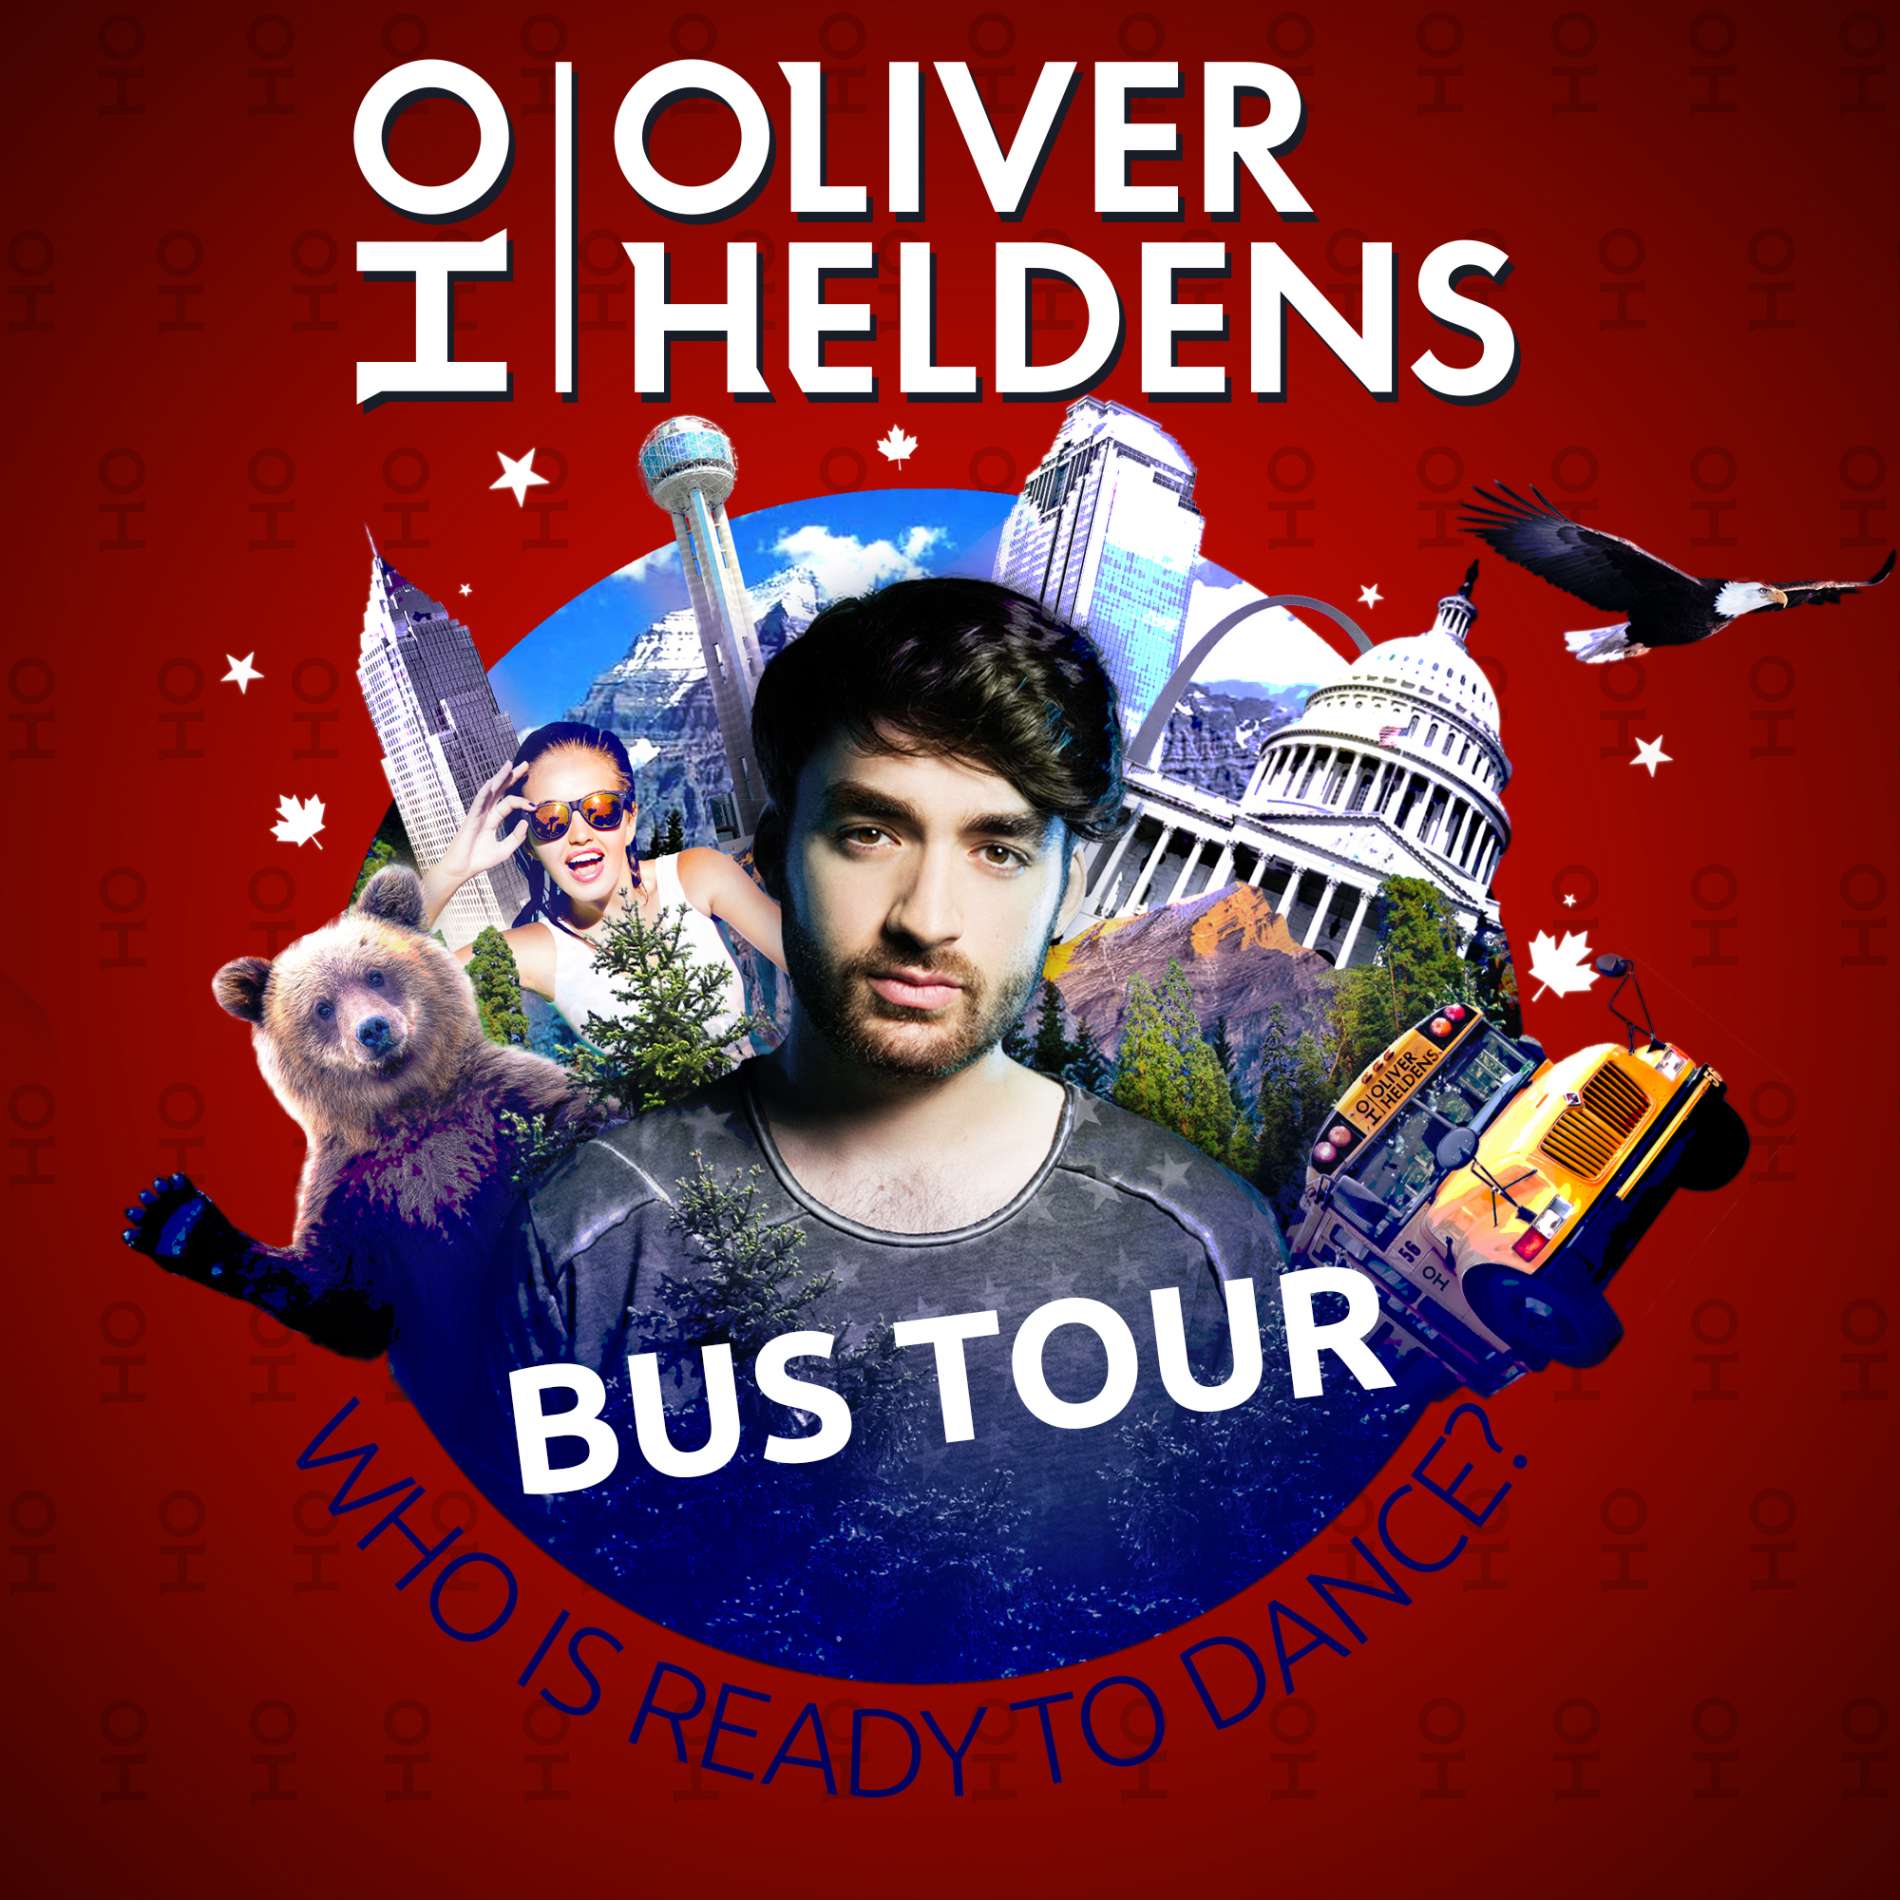 Win tickets to Oliver Heldens' upcoming N-American bus tour!